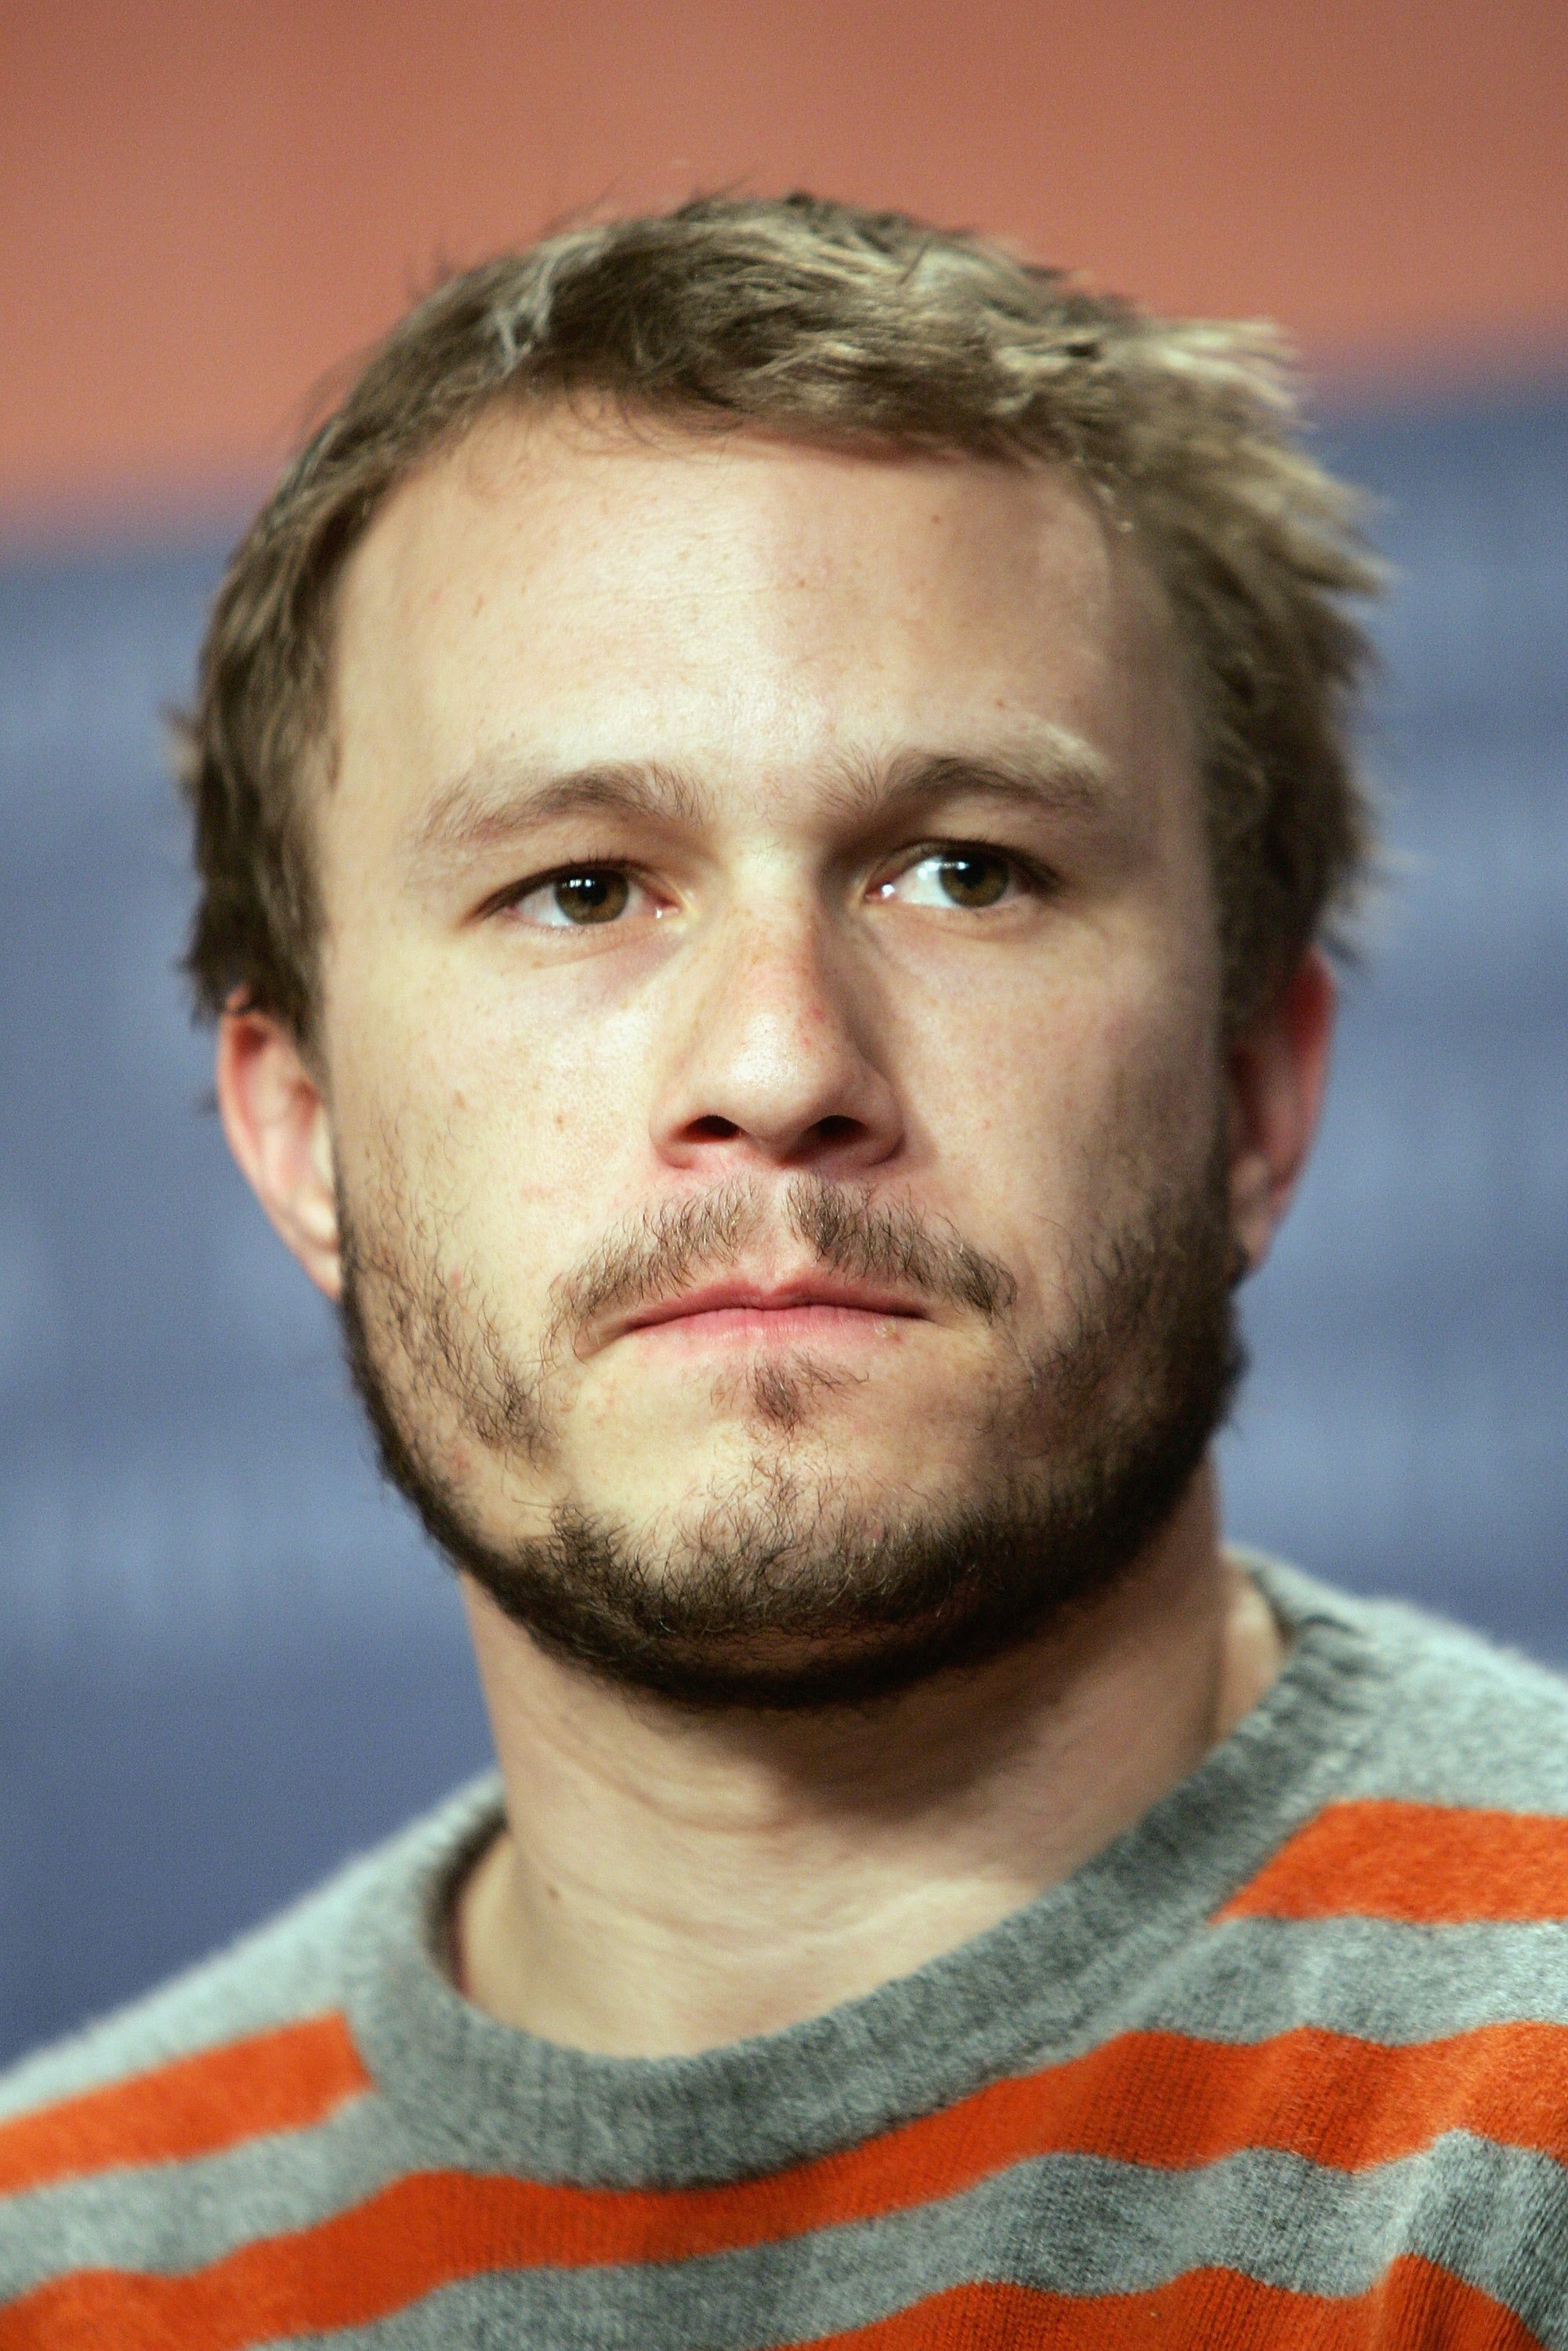 Heath Ledger at a press conference for "Candy" as part of the 56th Berlin International Film Festival (Berlinale) on February 15, 2006 in Berlin, Germany.┃Source: Getty Images